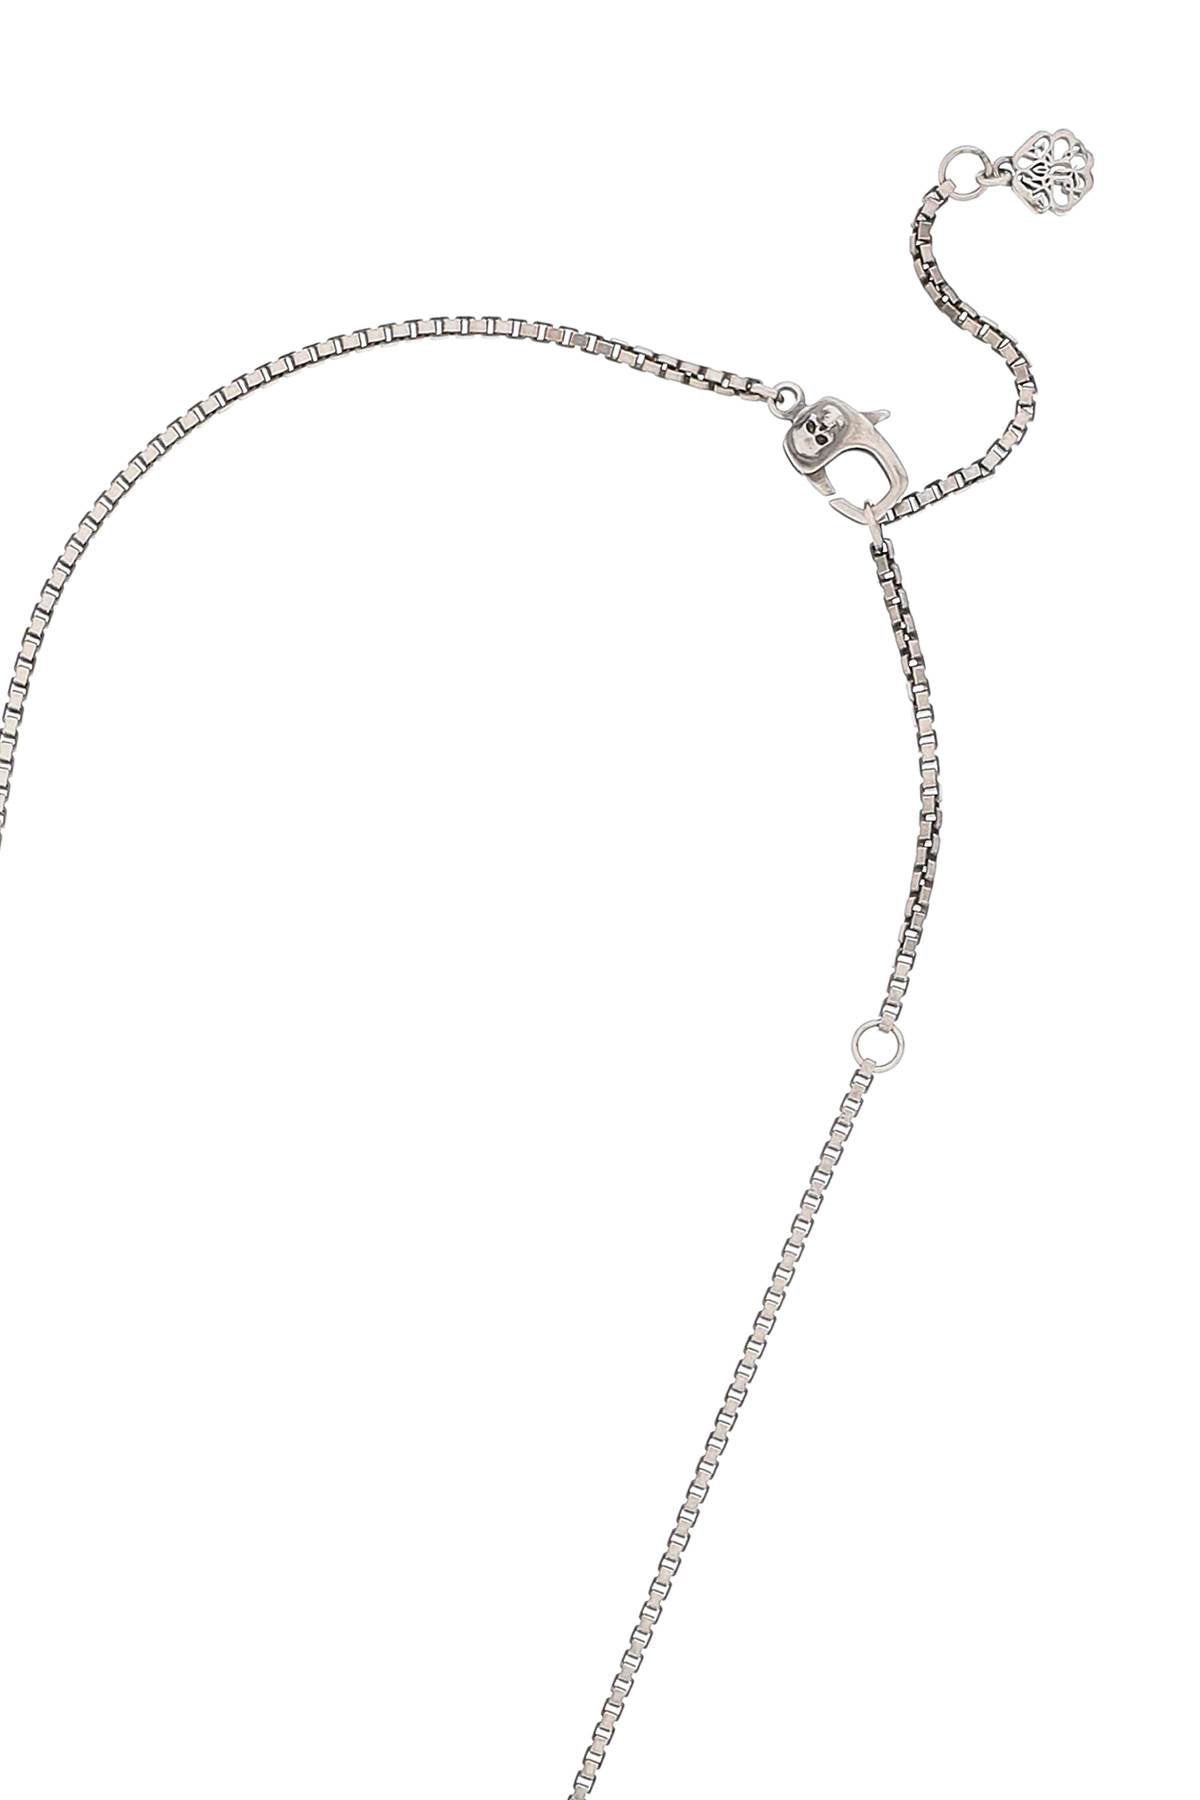 Alexander mcqueen necklace with tag